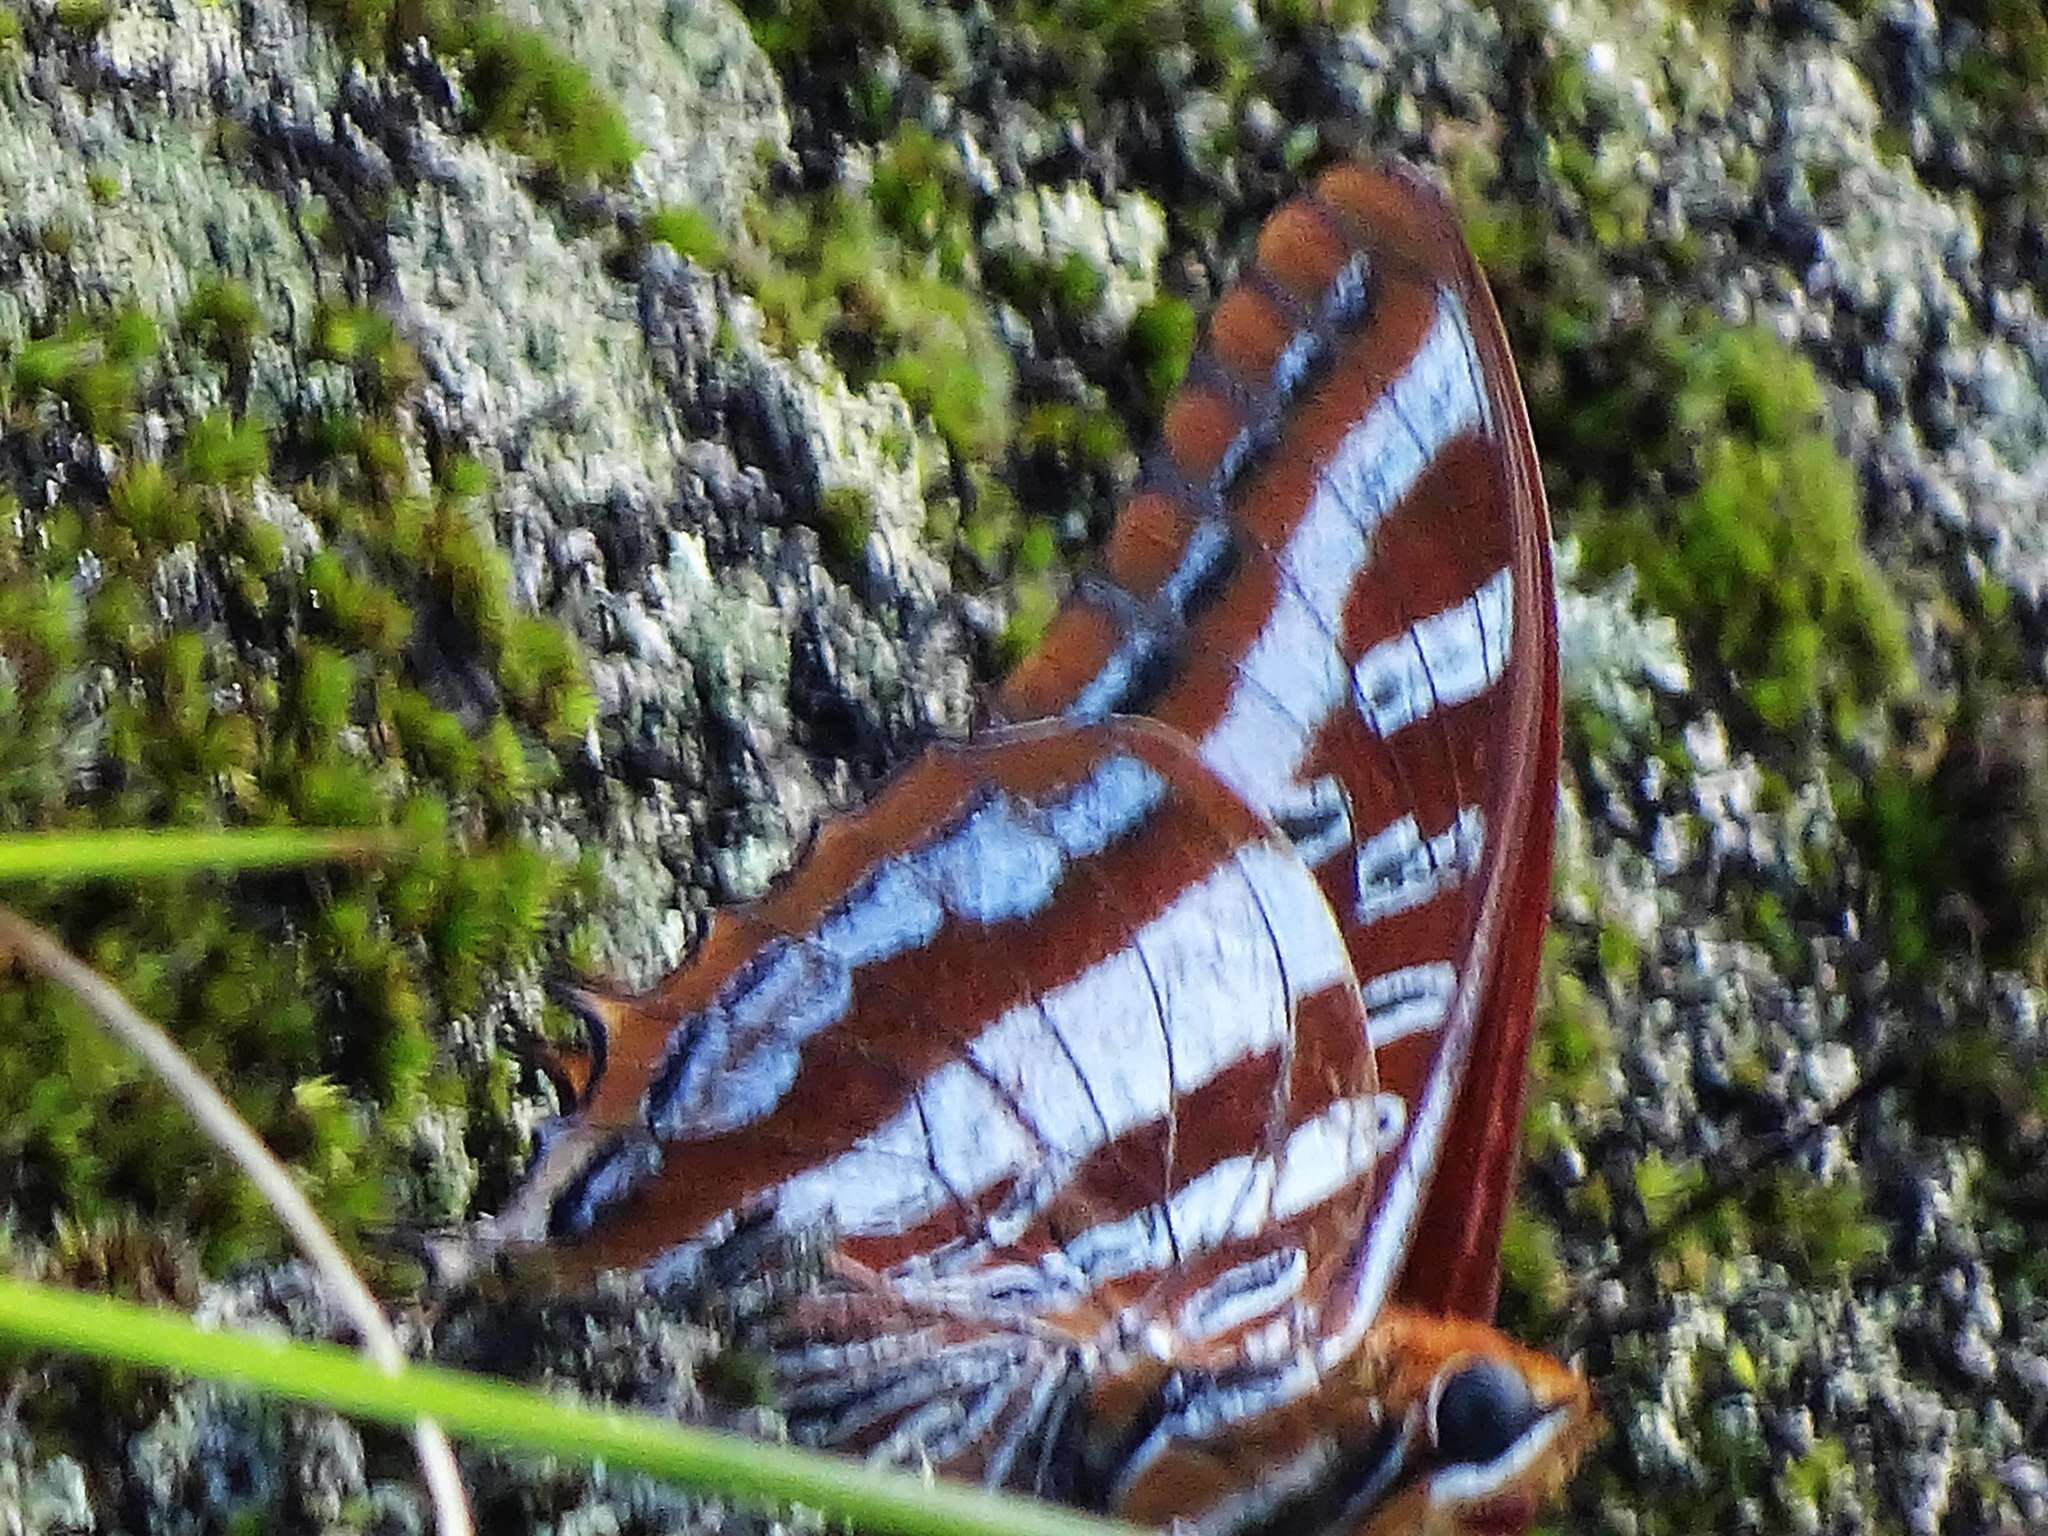 Image of Charaxes druceanus Butler 1869